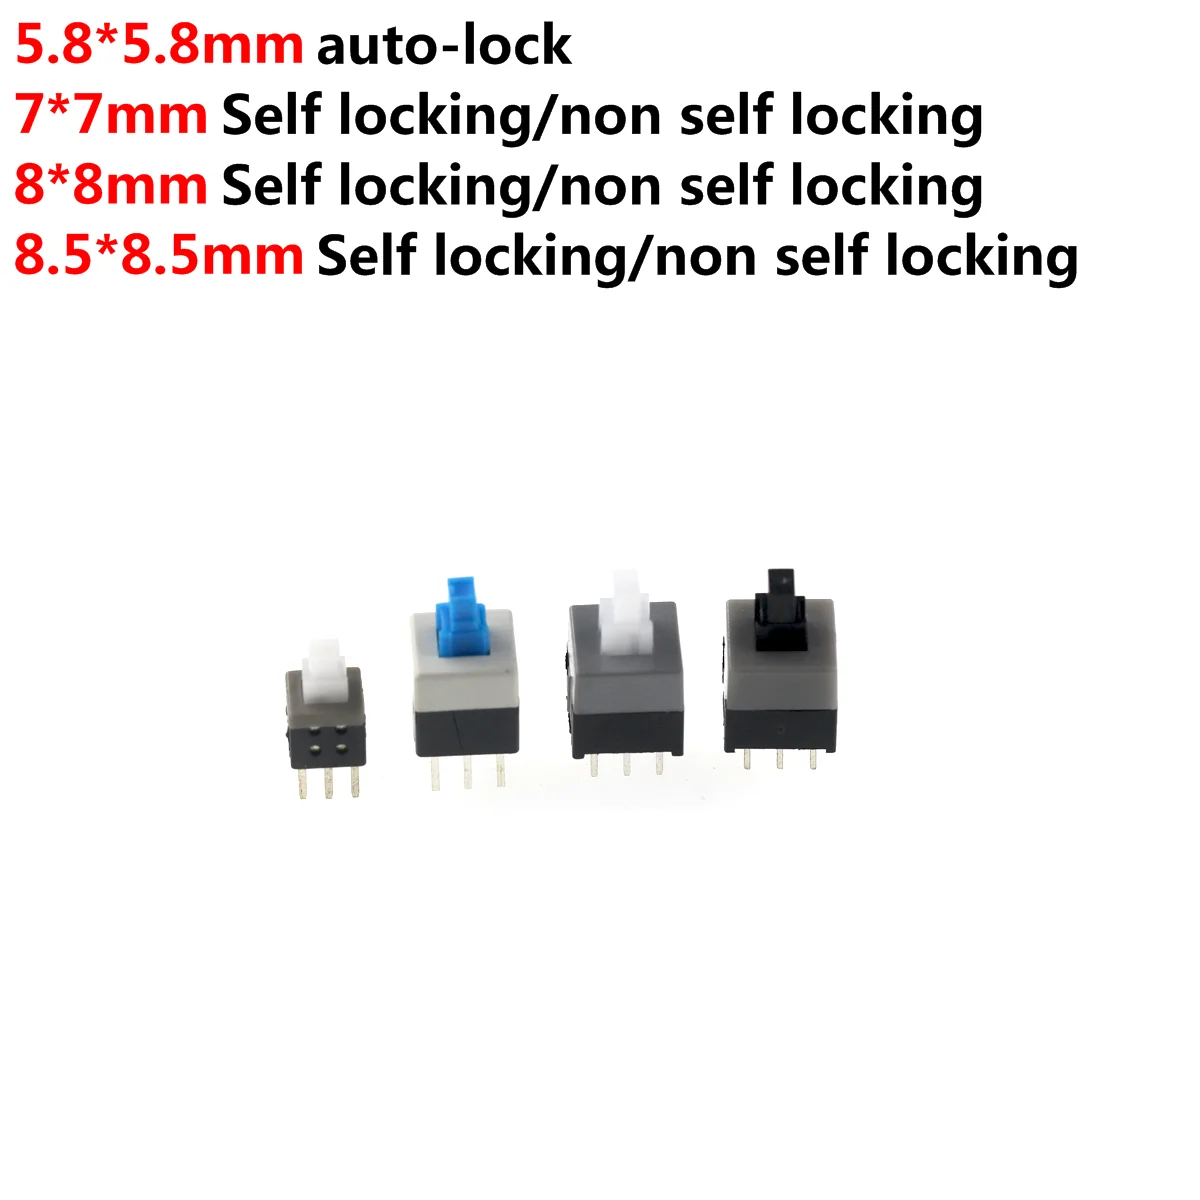 100PCS/LOT 5.8x5.8 7x7 8x8 8.5x8.5mm Self Locking / UNlock Push Tactile Power Micro Switch 6 Pin Button Switches 5 5 1 5 micro switch for honda tactile push button for audi car remote control key button switches